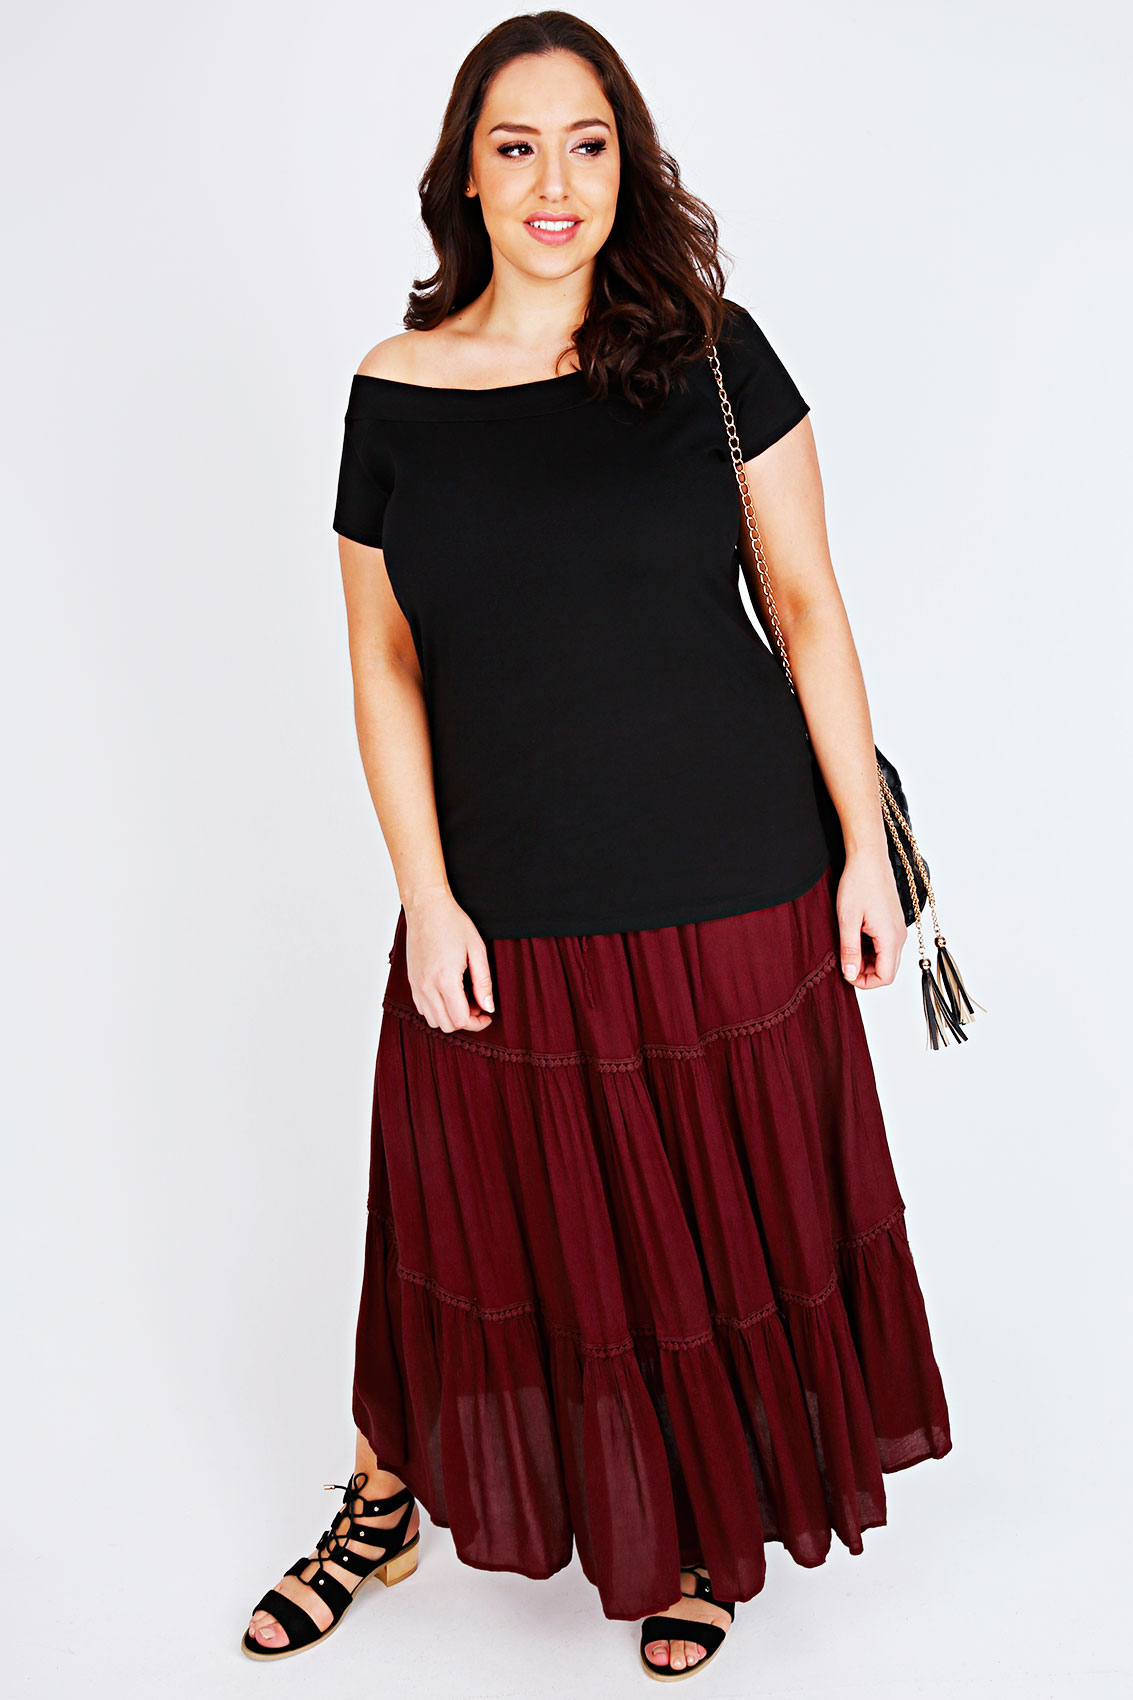 Brick Red Gypsy Maxi Skirt With Crochet Detail Plus Size 14 to 36